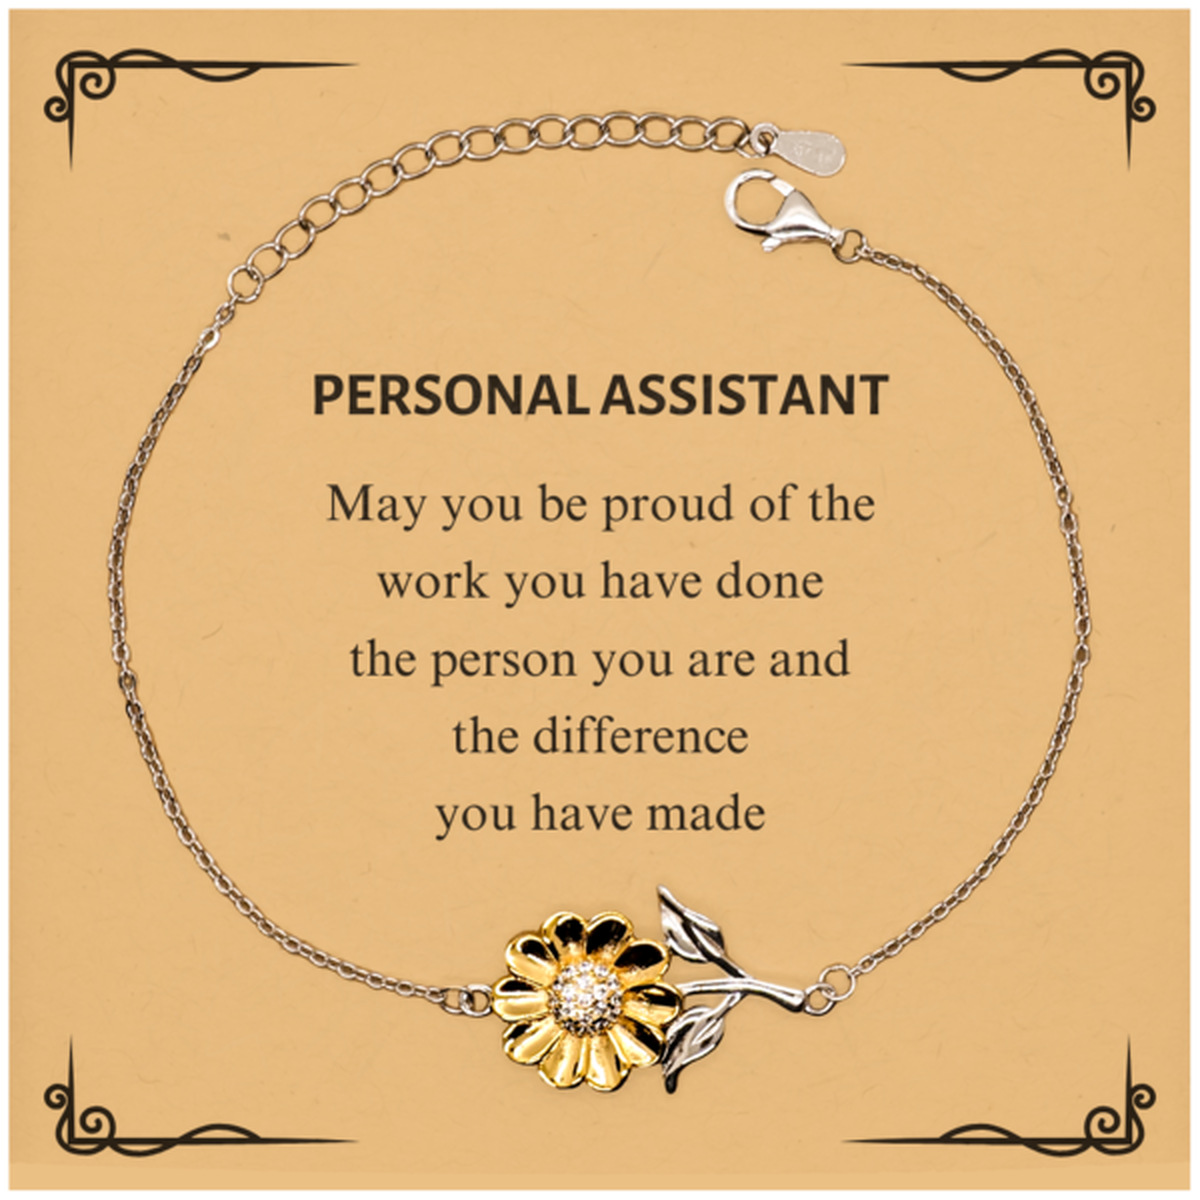 Personal Assistant May you be proud of the work you have done, Retirement Personal Assistant Sunflower Bracelet for Colleague Appreciation Gifts Amazing for Personal Assistant